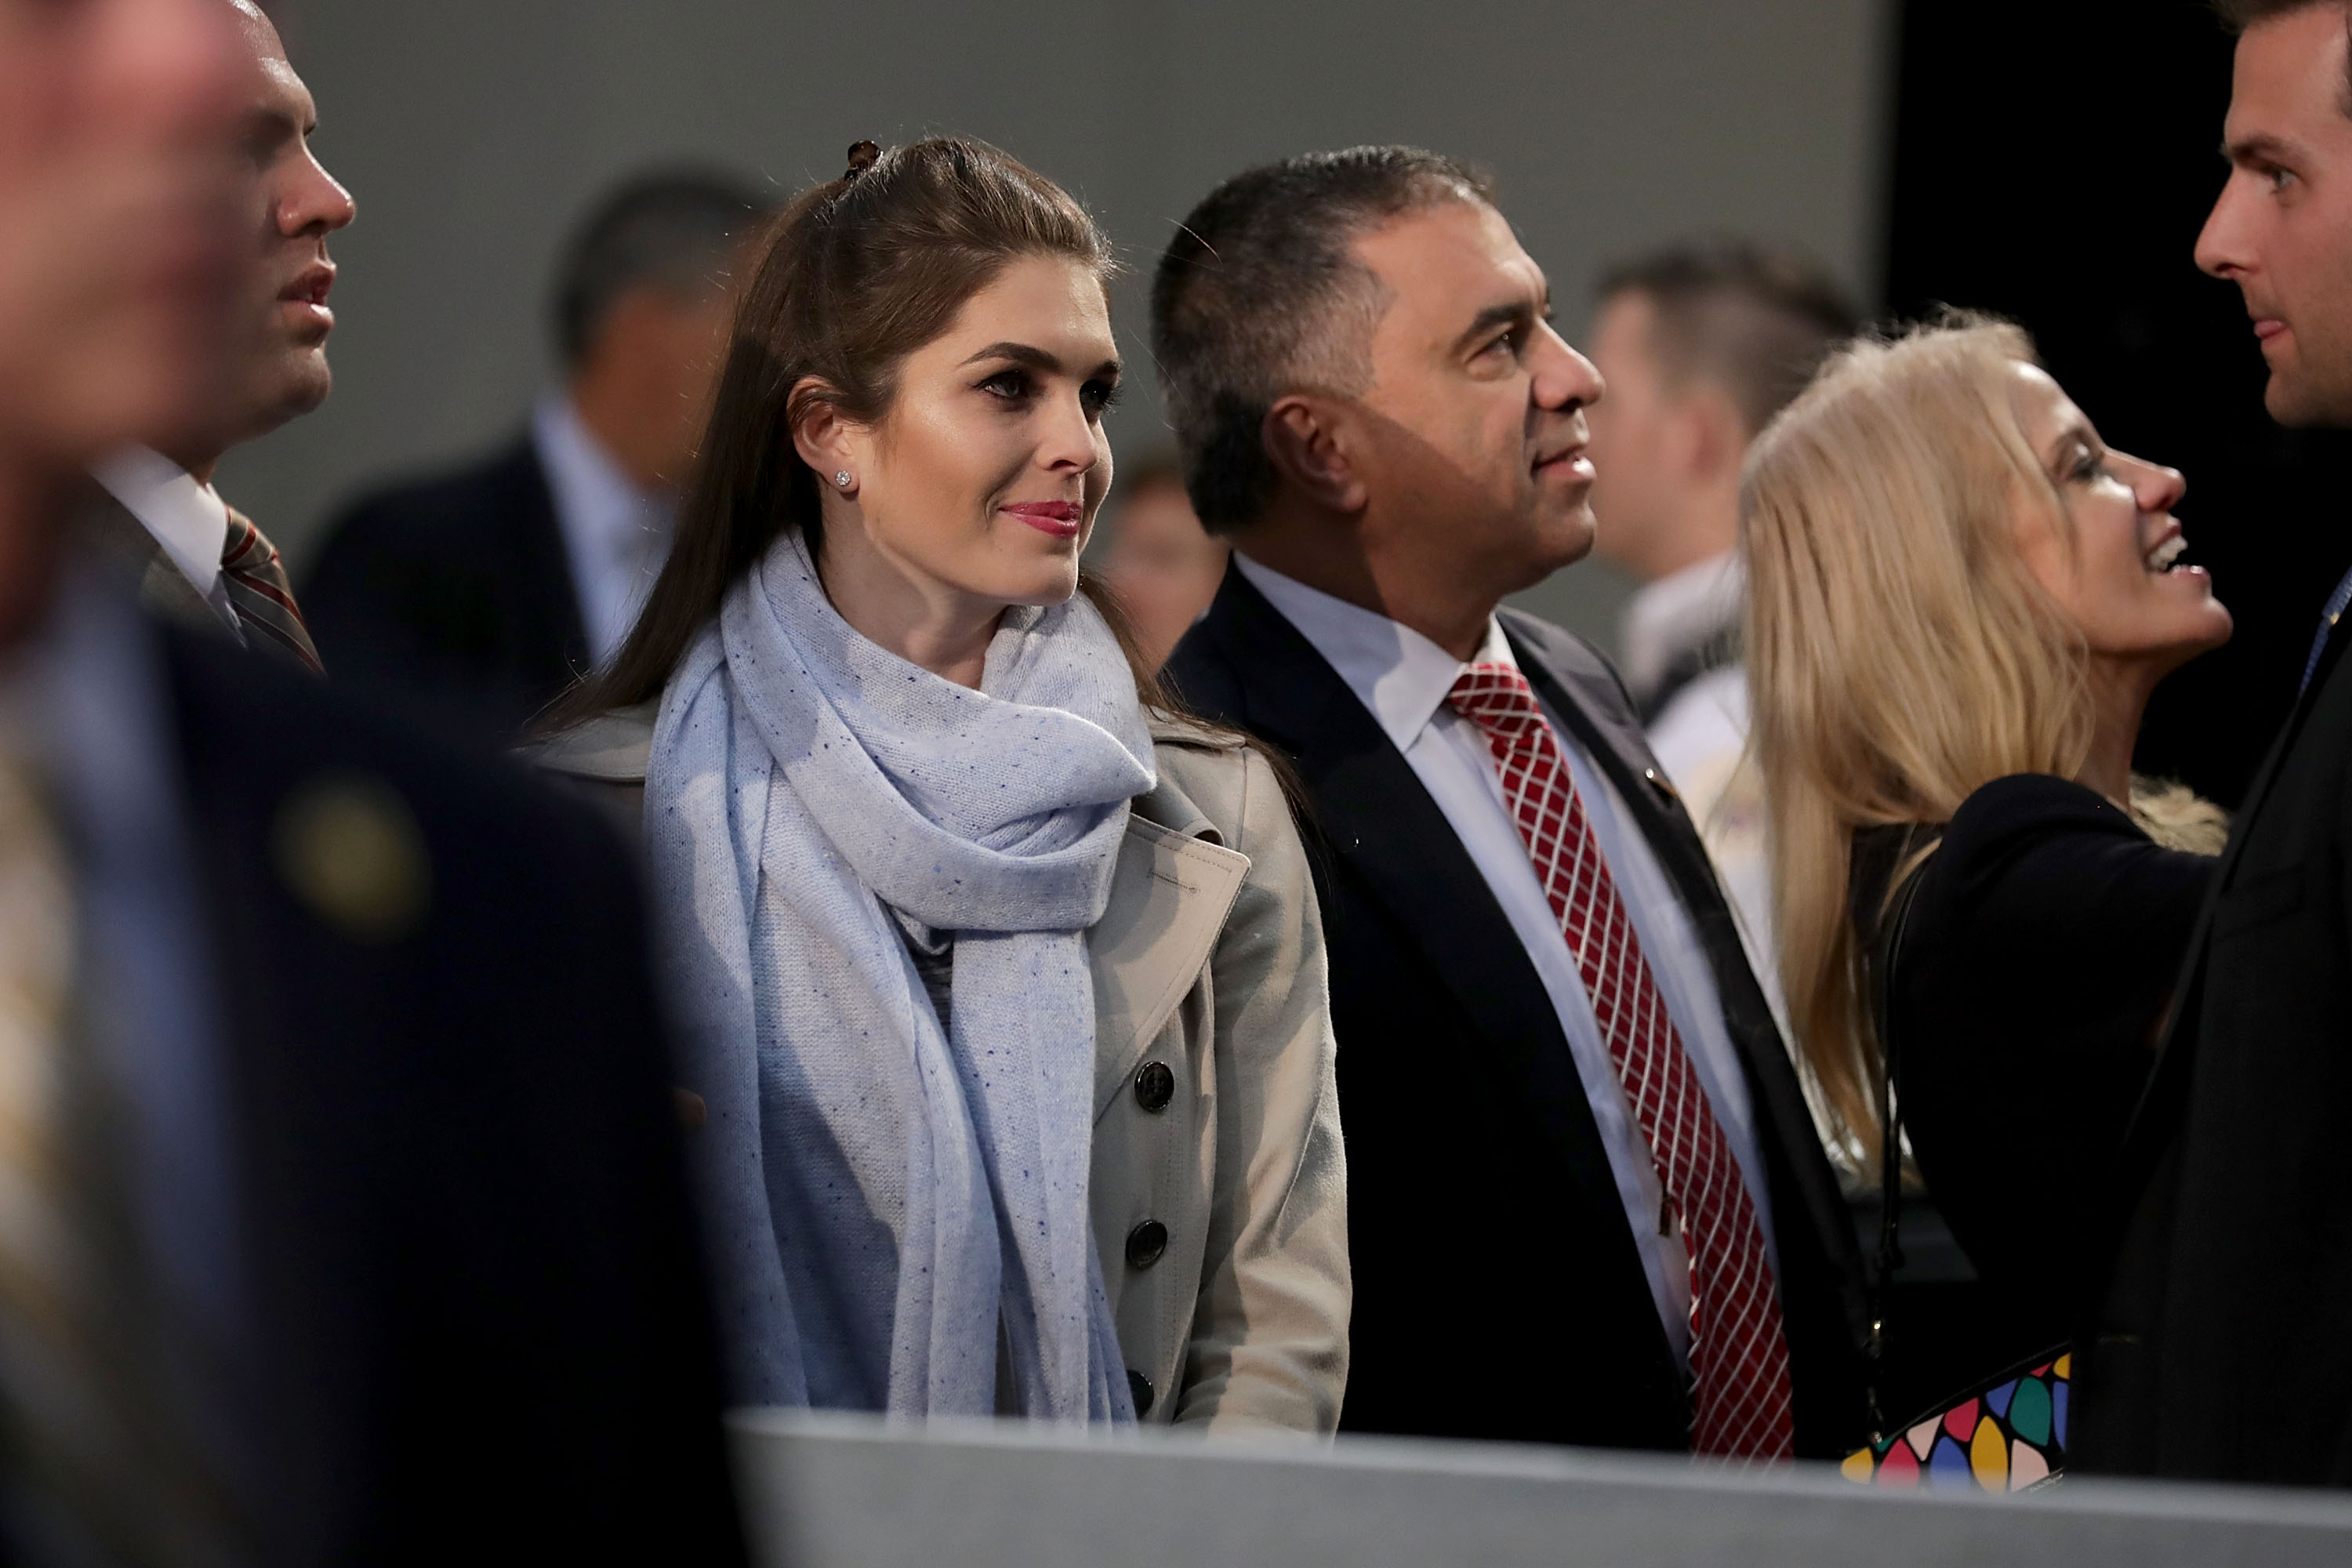 GRAND RAPIDS, MI - NOVEMBER 08: (L-R) Republican presidential nominee Donald Trump's press secretary Hope Hicks, Deputy campaign manager David Bossie and campaign manager Kellyanne Conway listen to Trump during their final campaign rally on Election Day in the Devos Place November 8, 2016 in Grand Rapids, Michigan. Trump's marathon last day of campaigning stretched past midnight and into Election Day. (Photo by Chip Somodevilla/Getty Images)